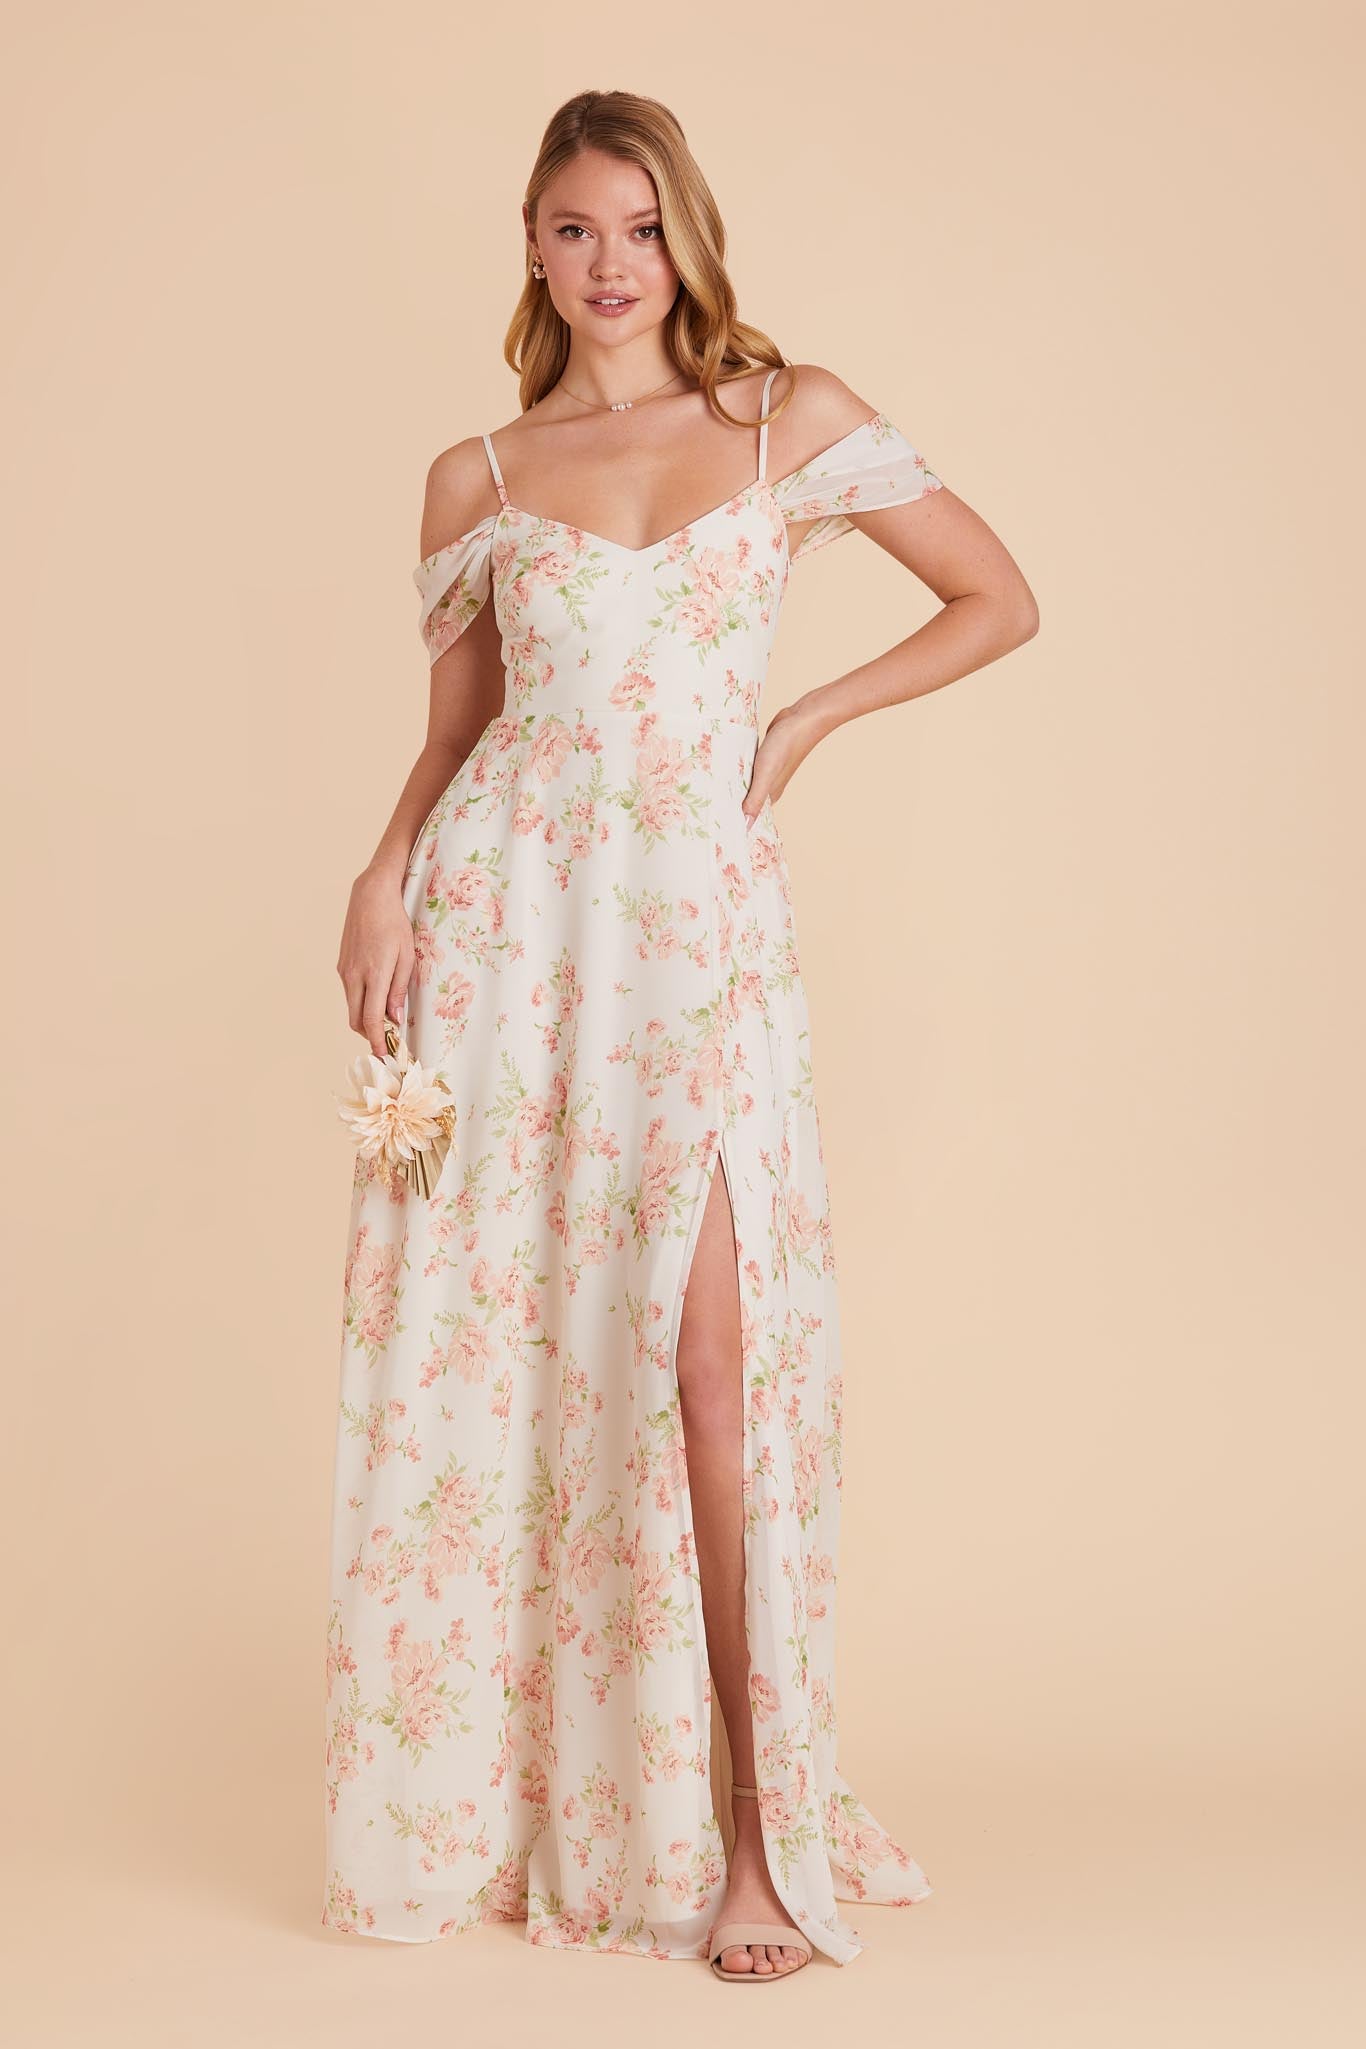 Whimsical Blooms Devin Convertible Dress by Birdy Grey